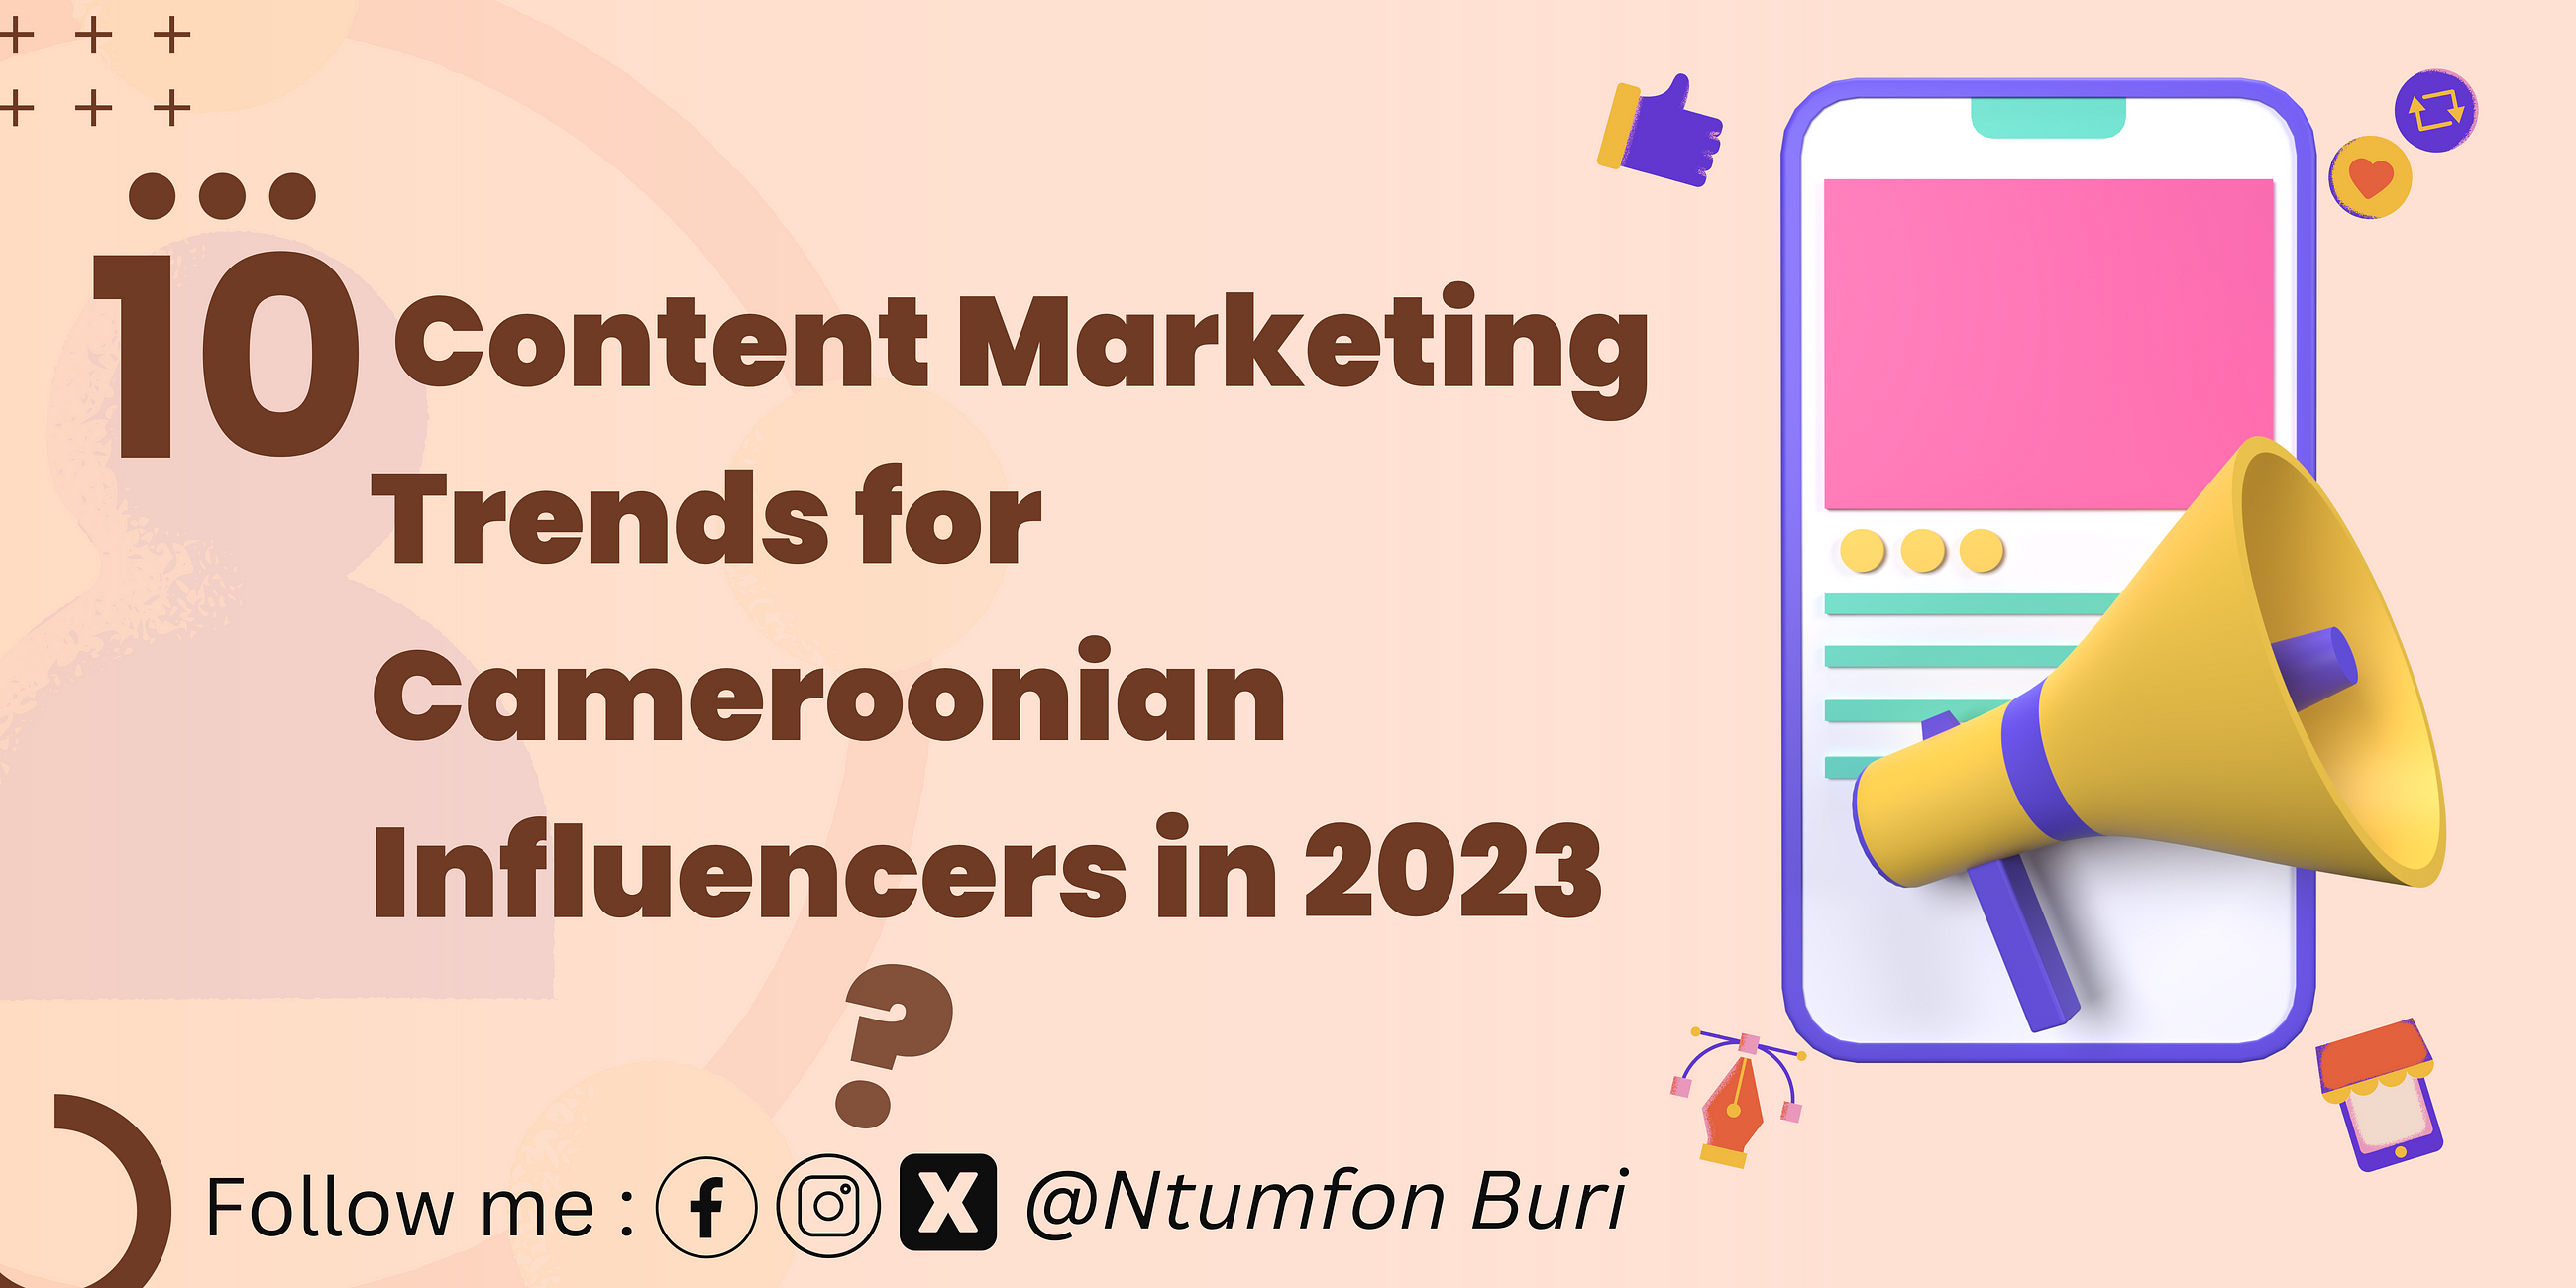 Ten Content Marketing Trends for Cameroonian Influencers in 2023